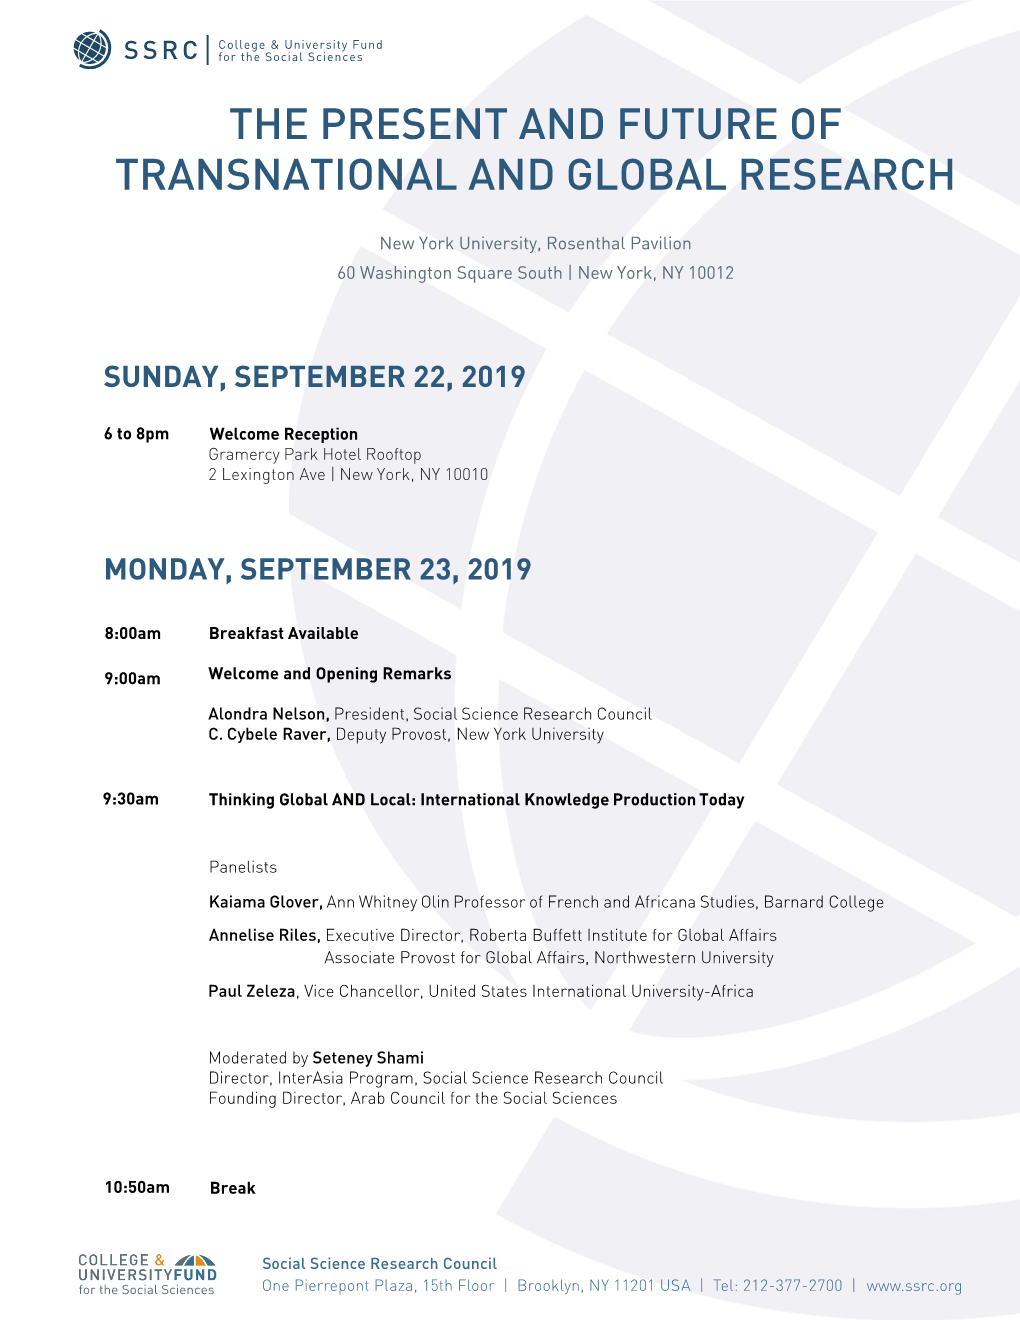 The Present and Future of Transnational and Global Research